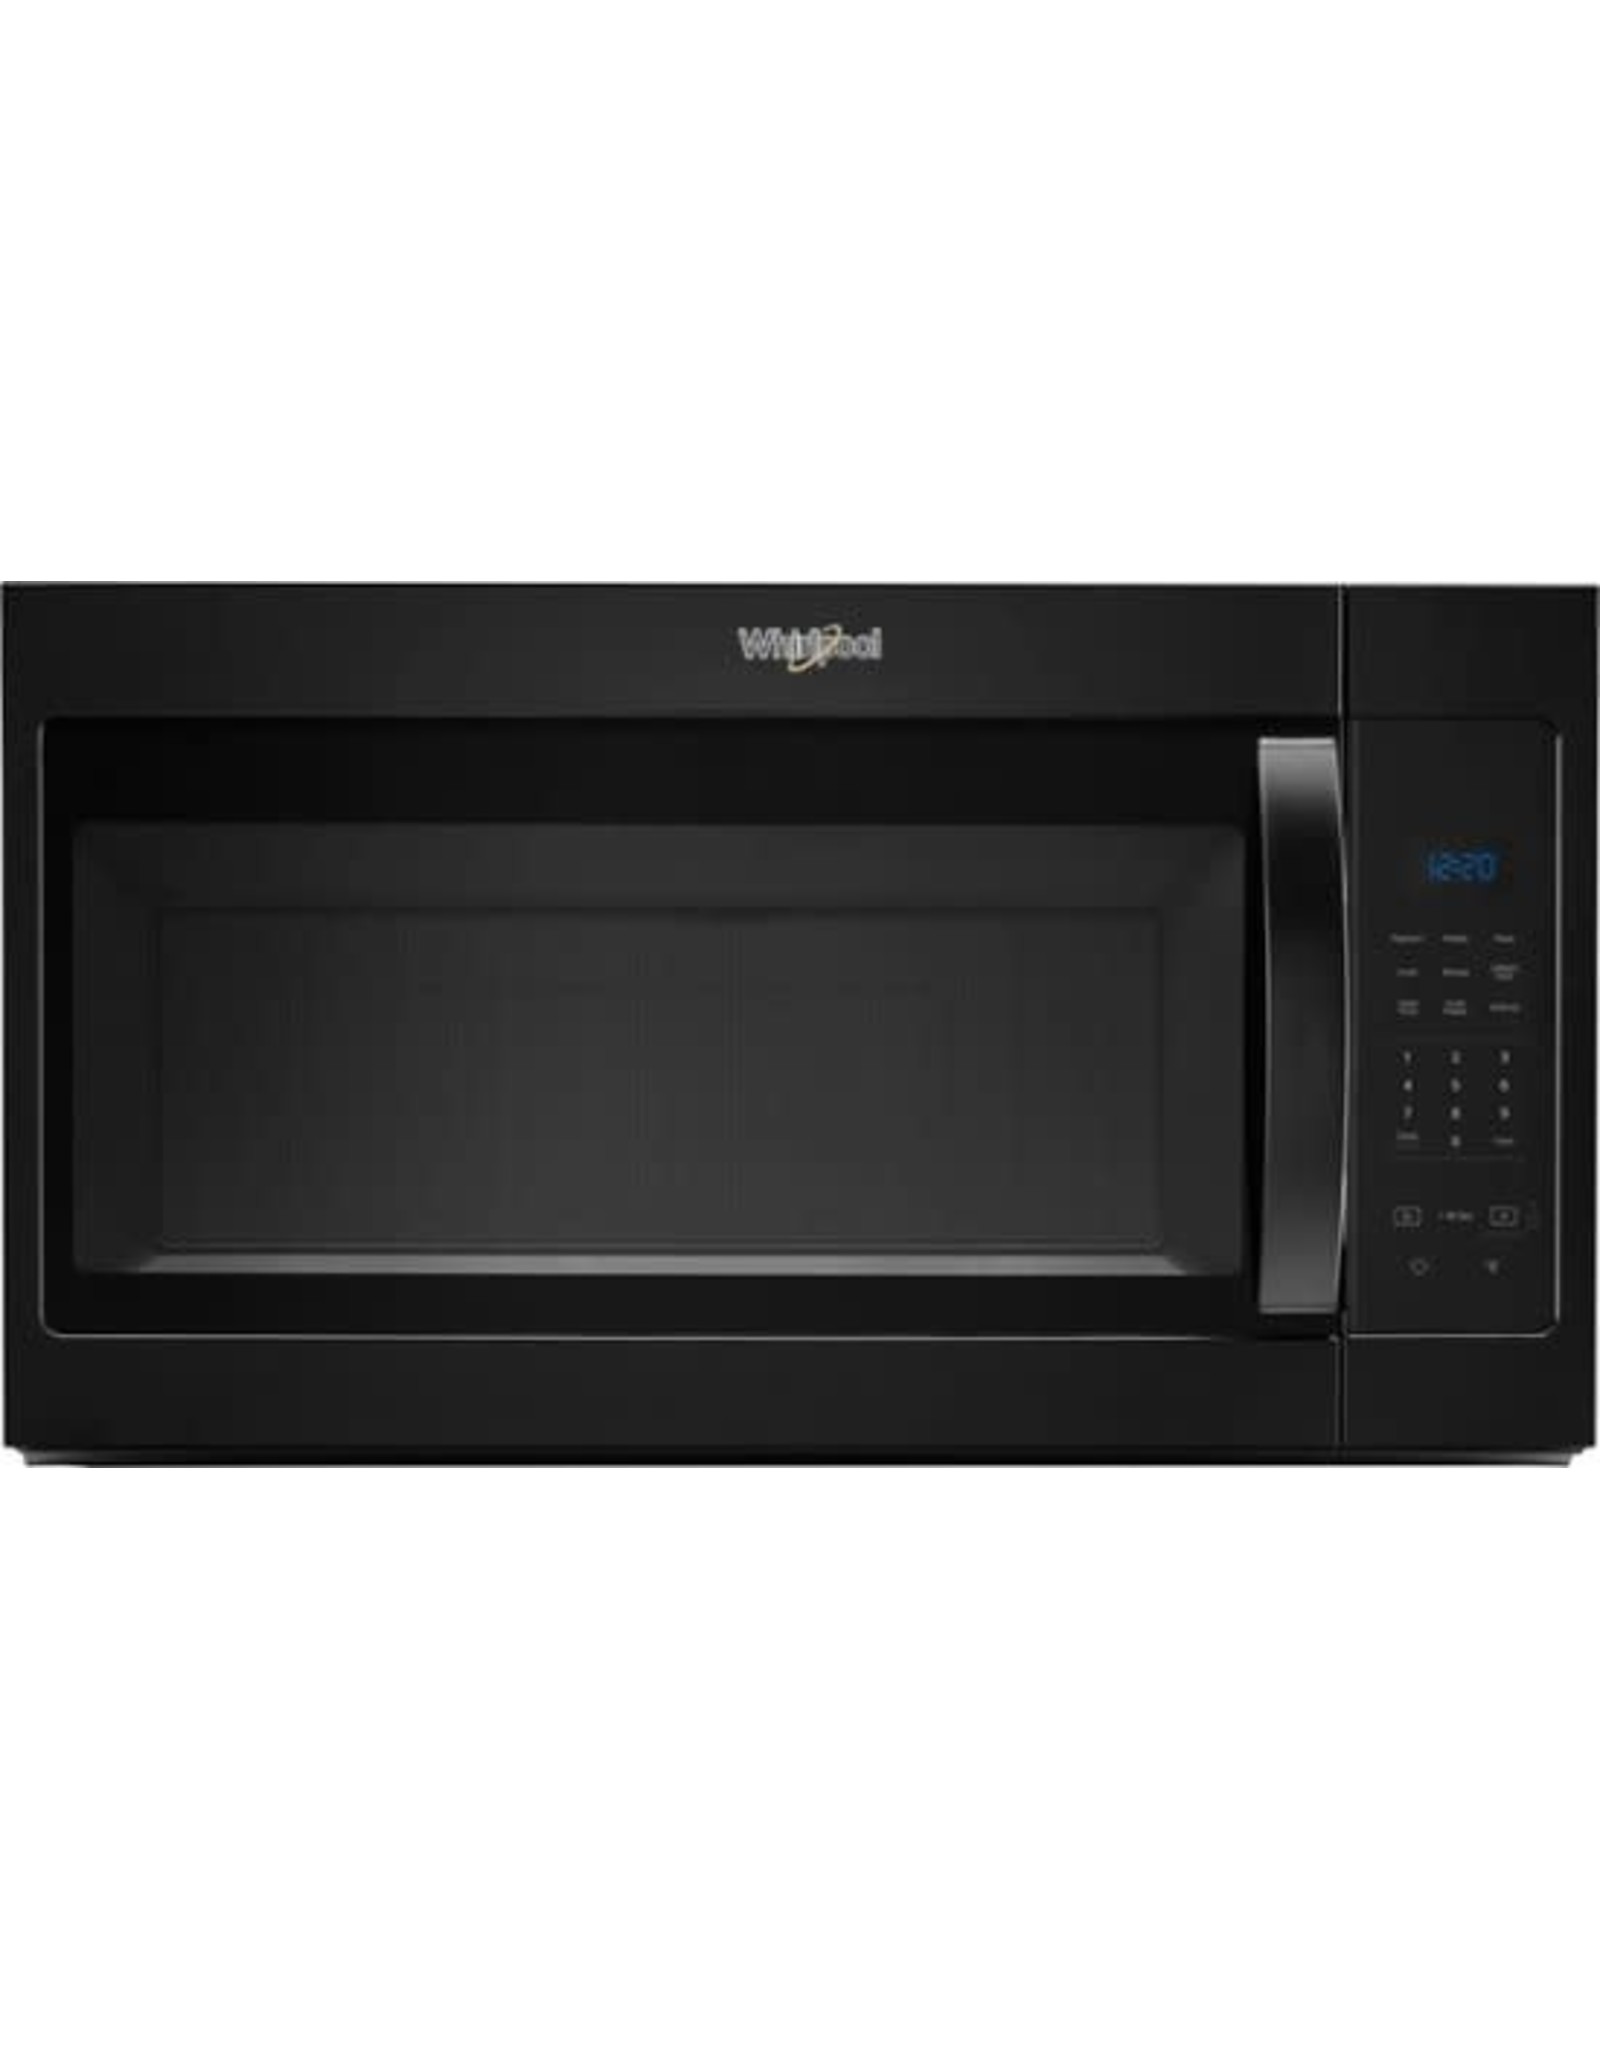 WMH31017HB WHR Microwave, Hood, Combination - 1.7 CU FT, 1000 WATTS, 2-PIECE FRONT, ST